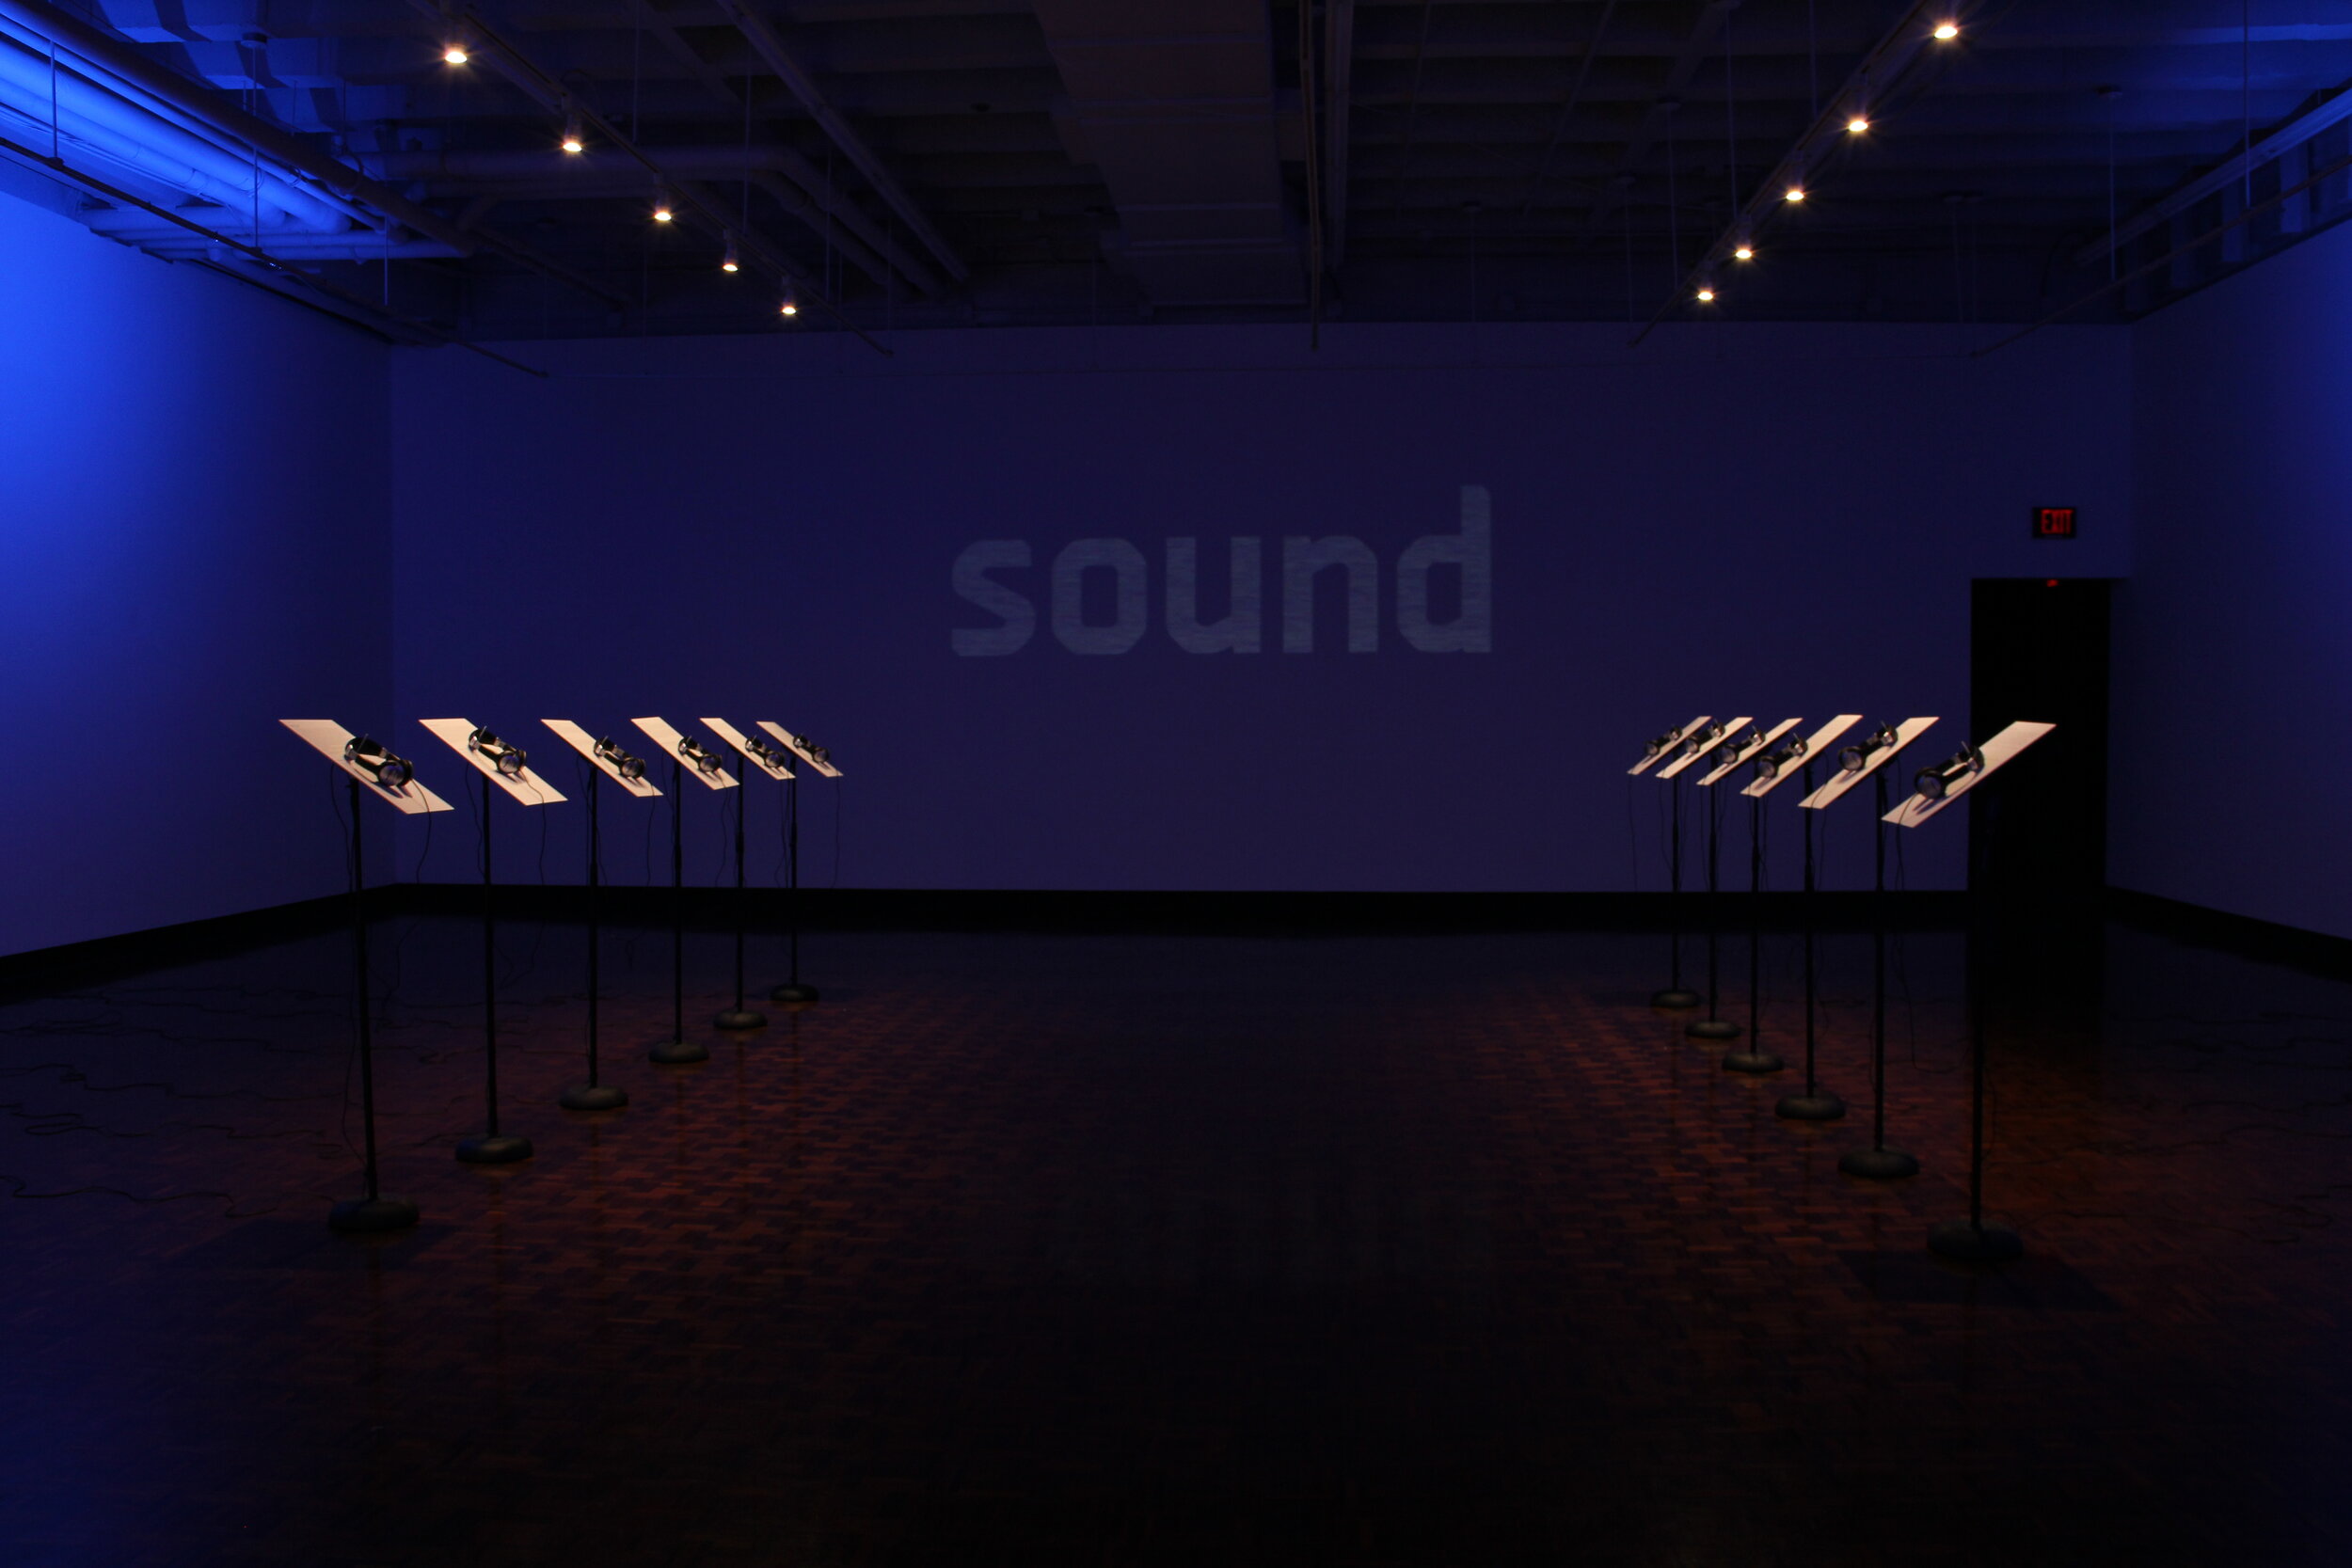  The “Sound” exhibition at Austin Peay State University, Tennessee, 2015. Photo courtesy of Michael Dickins. 